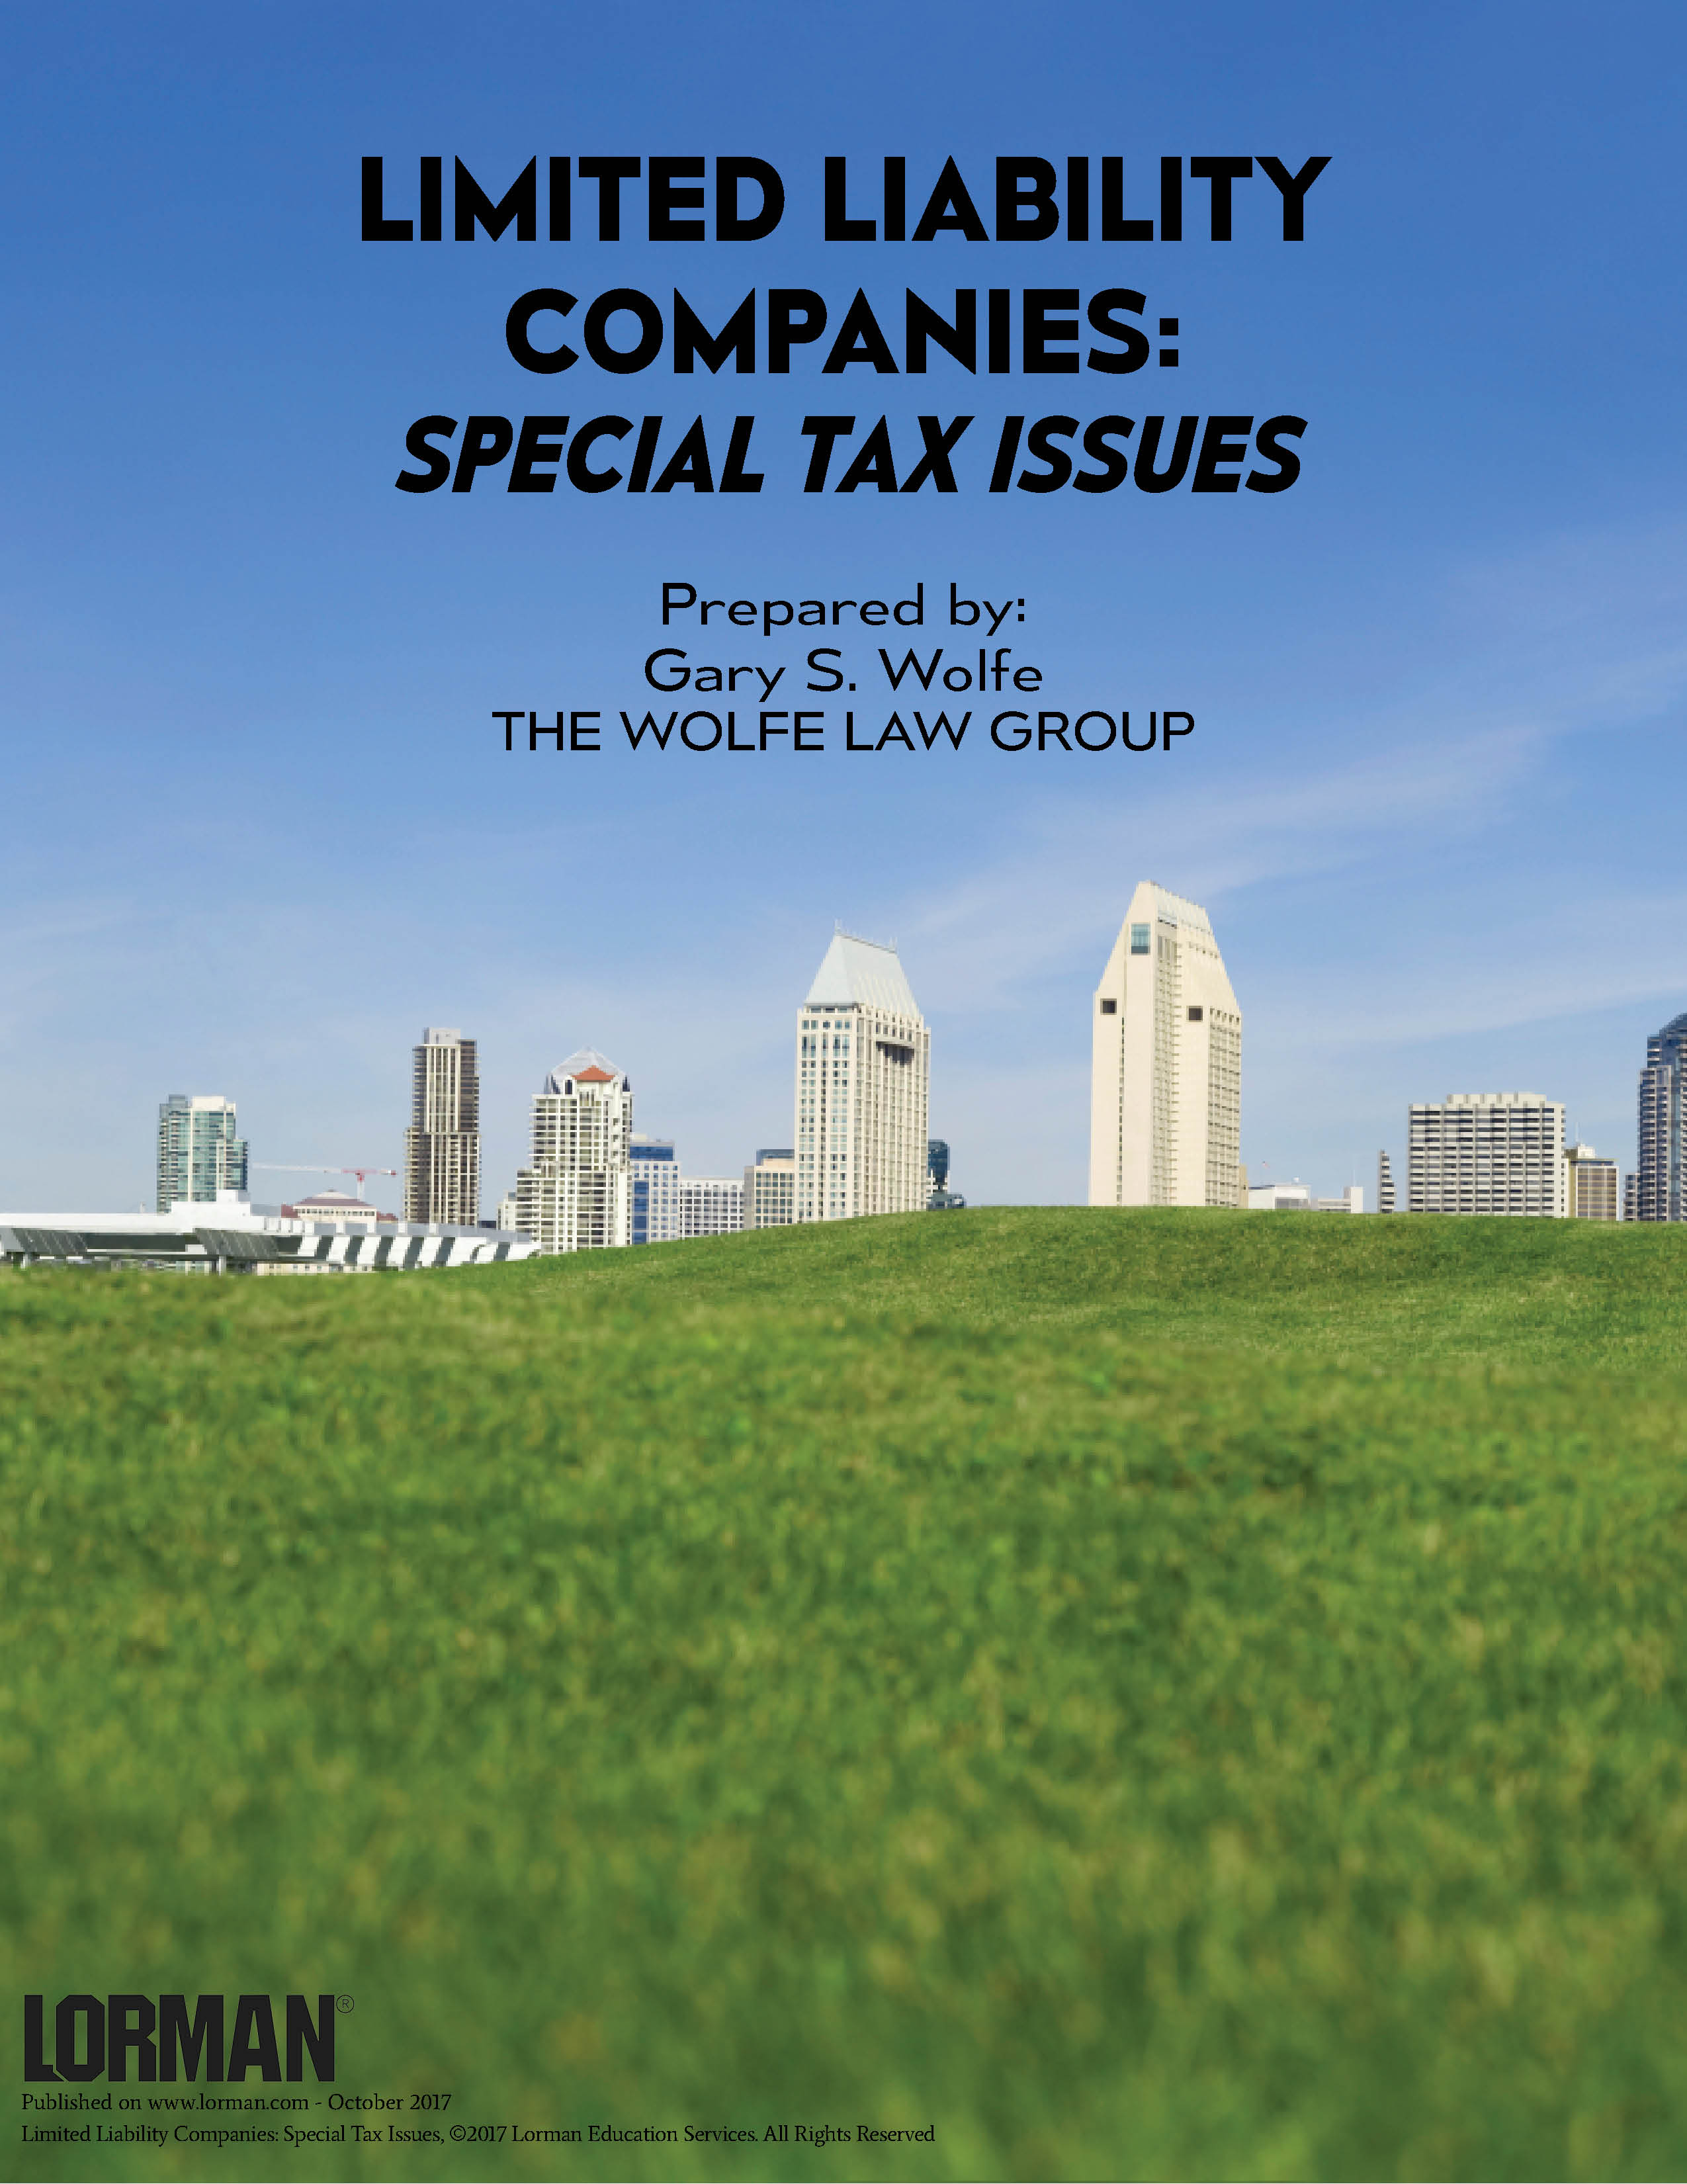 Limited Liability Companies: Special Tax Issues